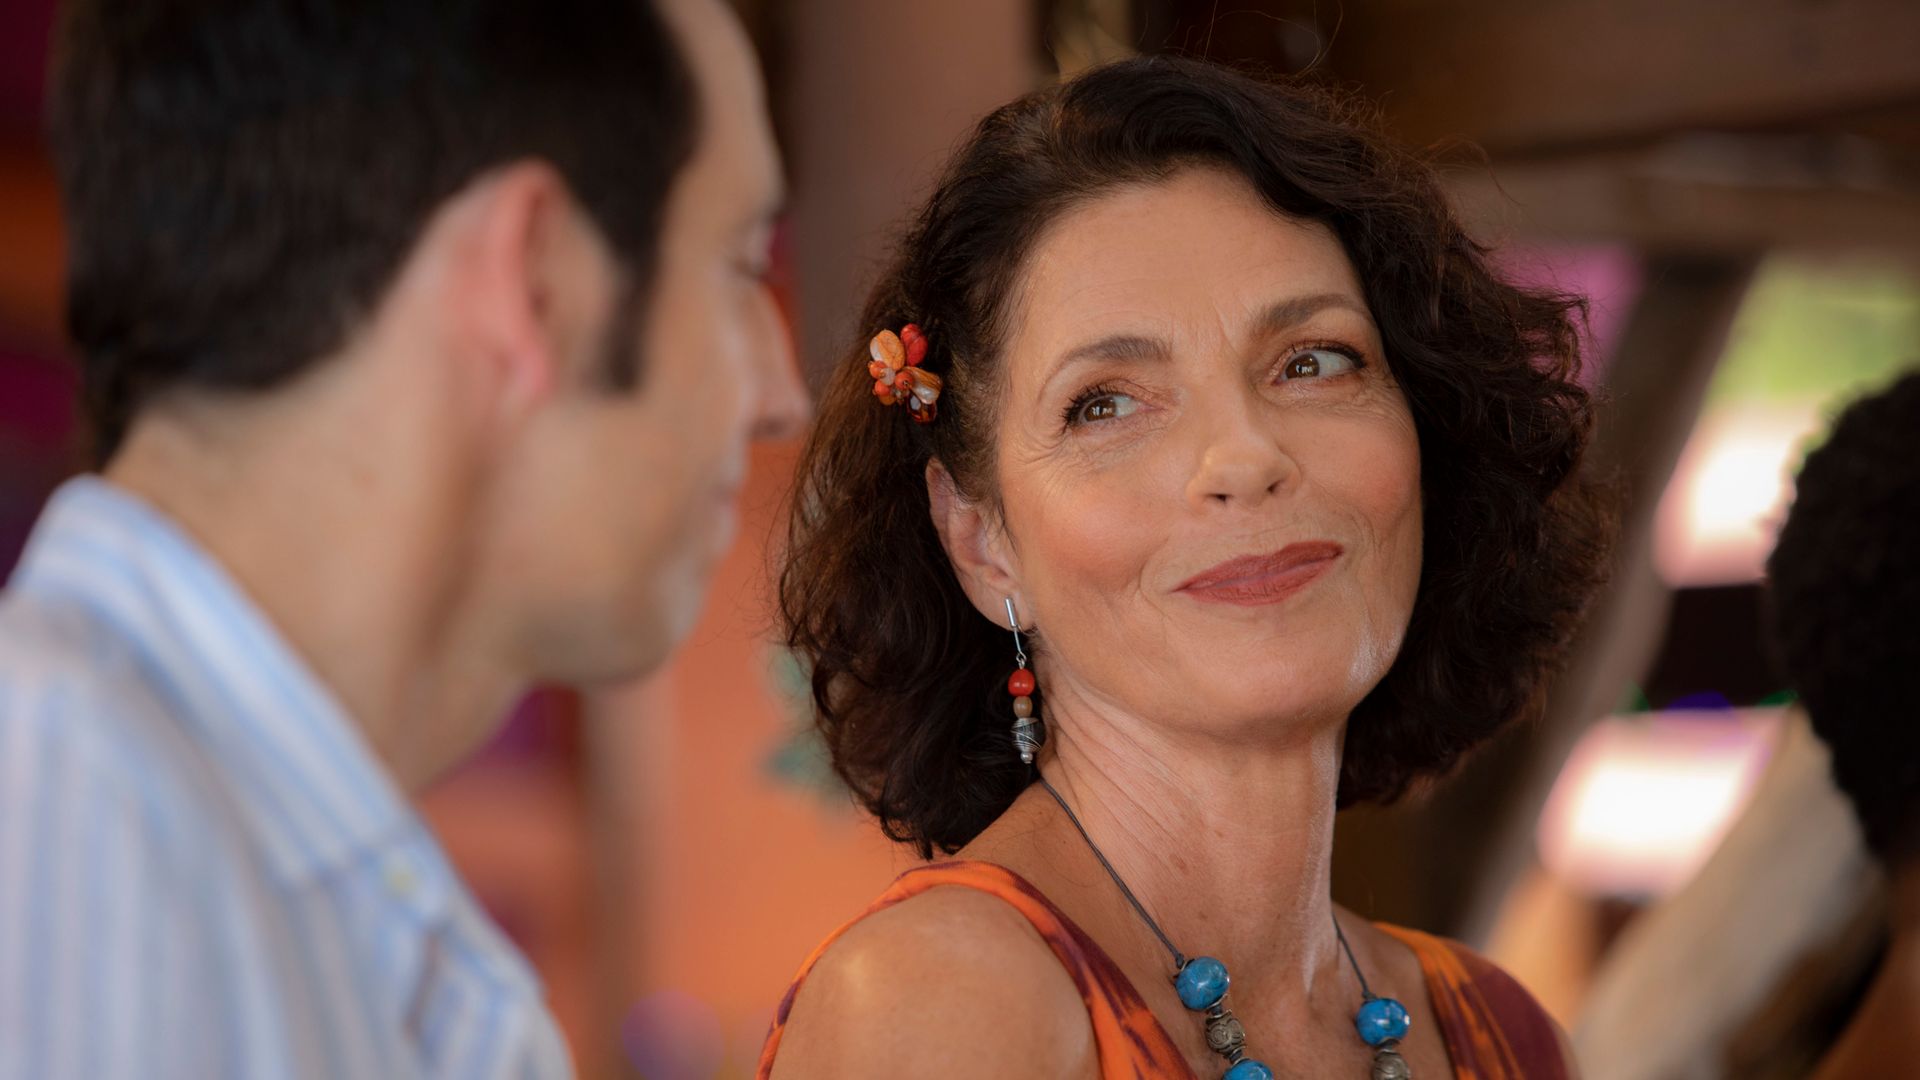 Élizabeth Bourgine plays Catherine Bordey in Death in Paradise